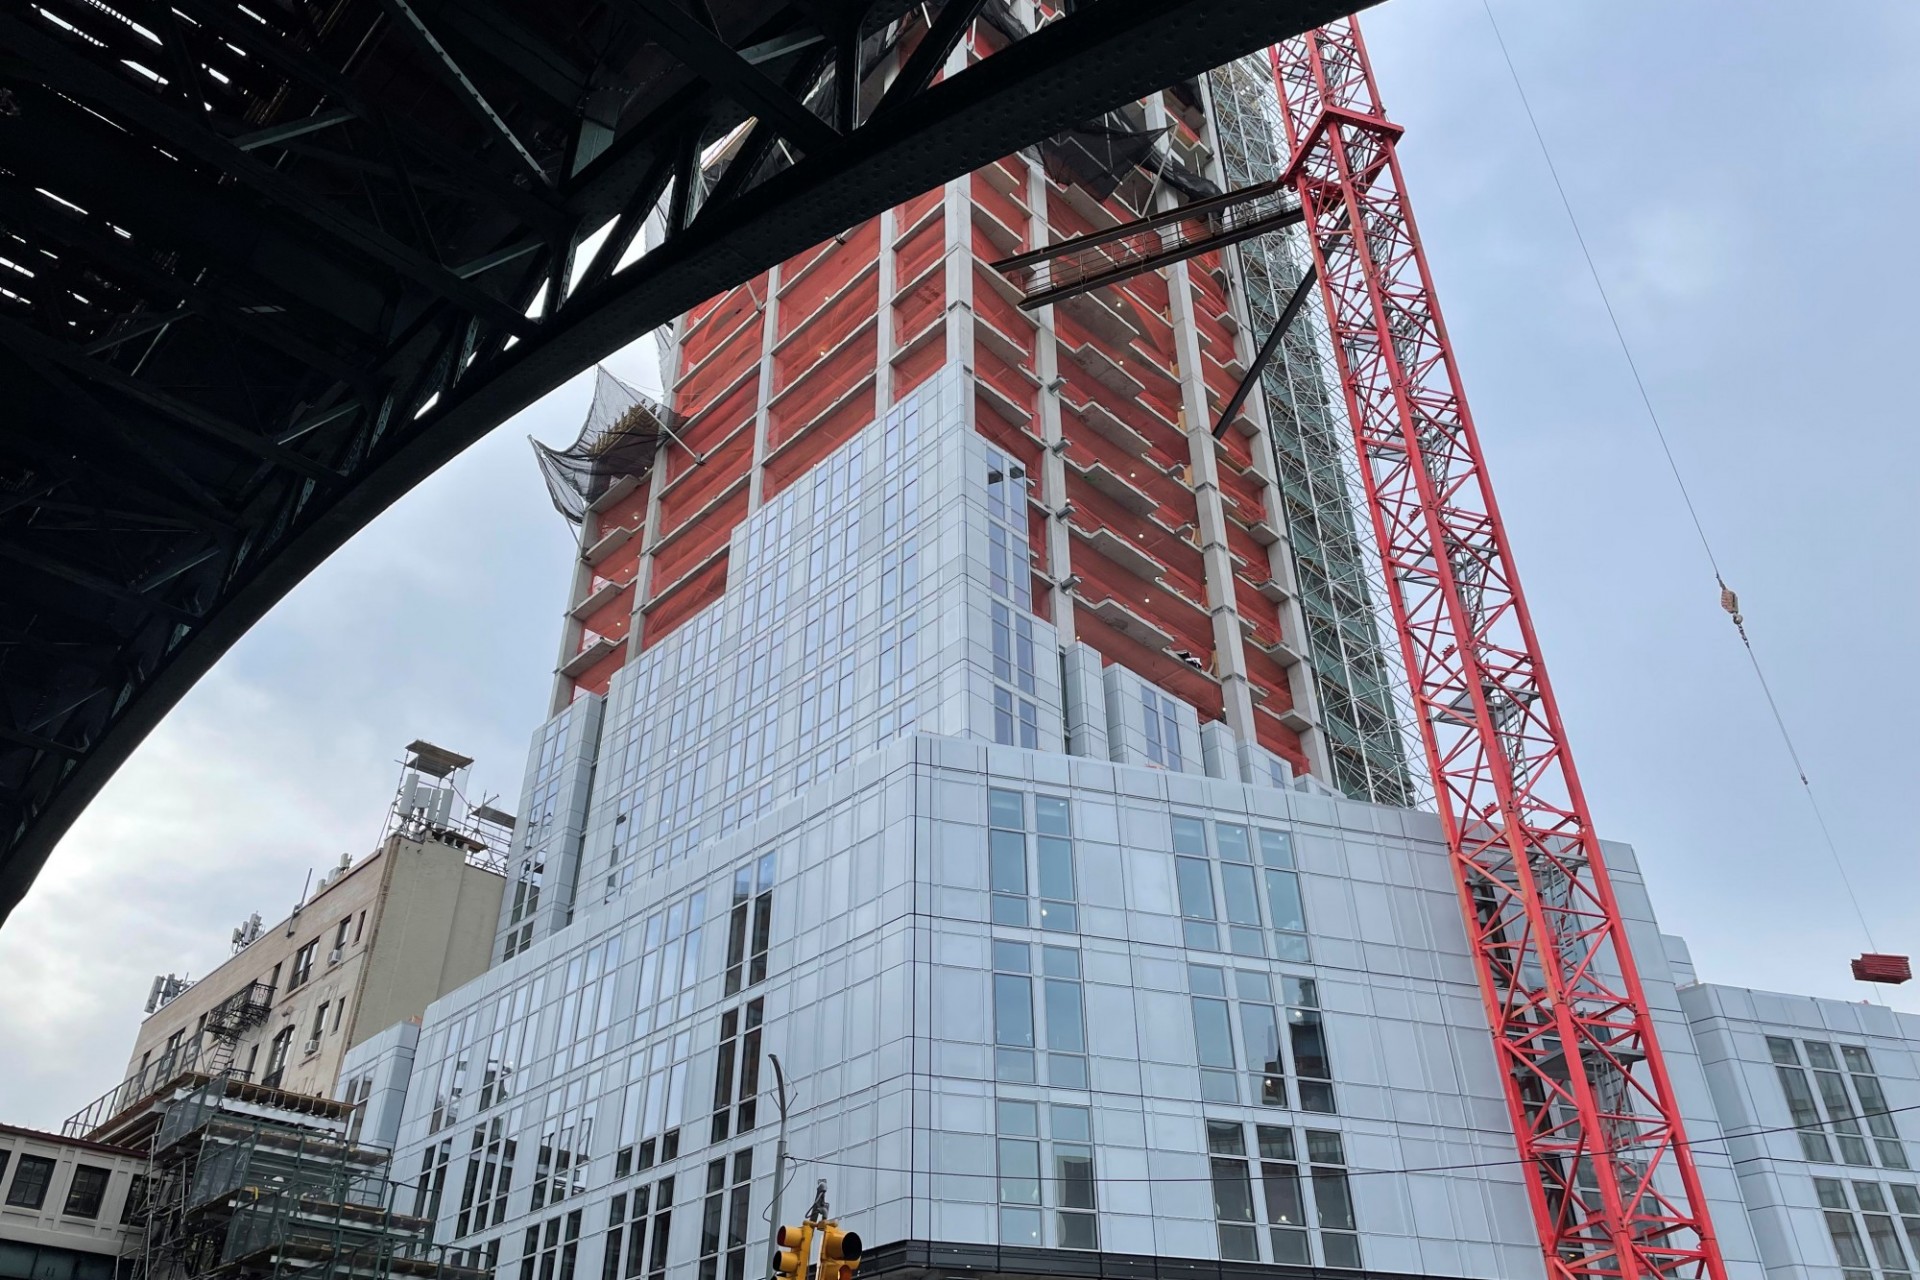 A view of the 600 W. 125th Street construction site near the street level, which has facade panels installed around it. 